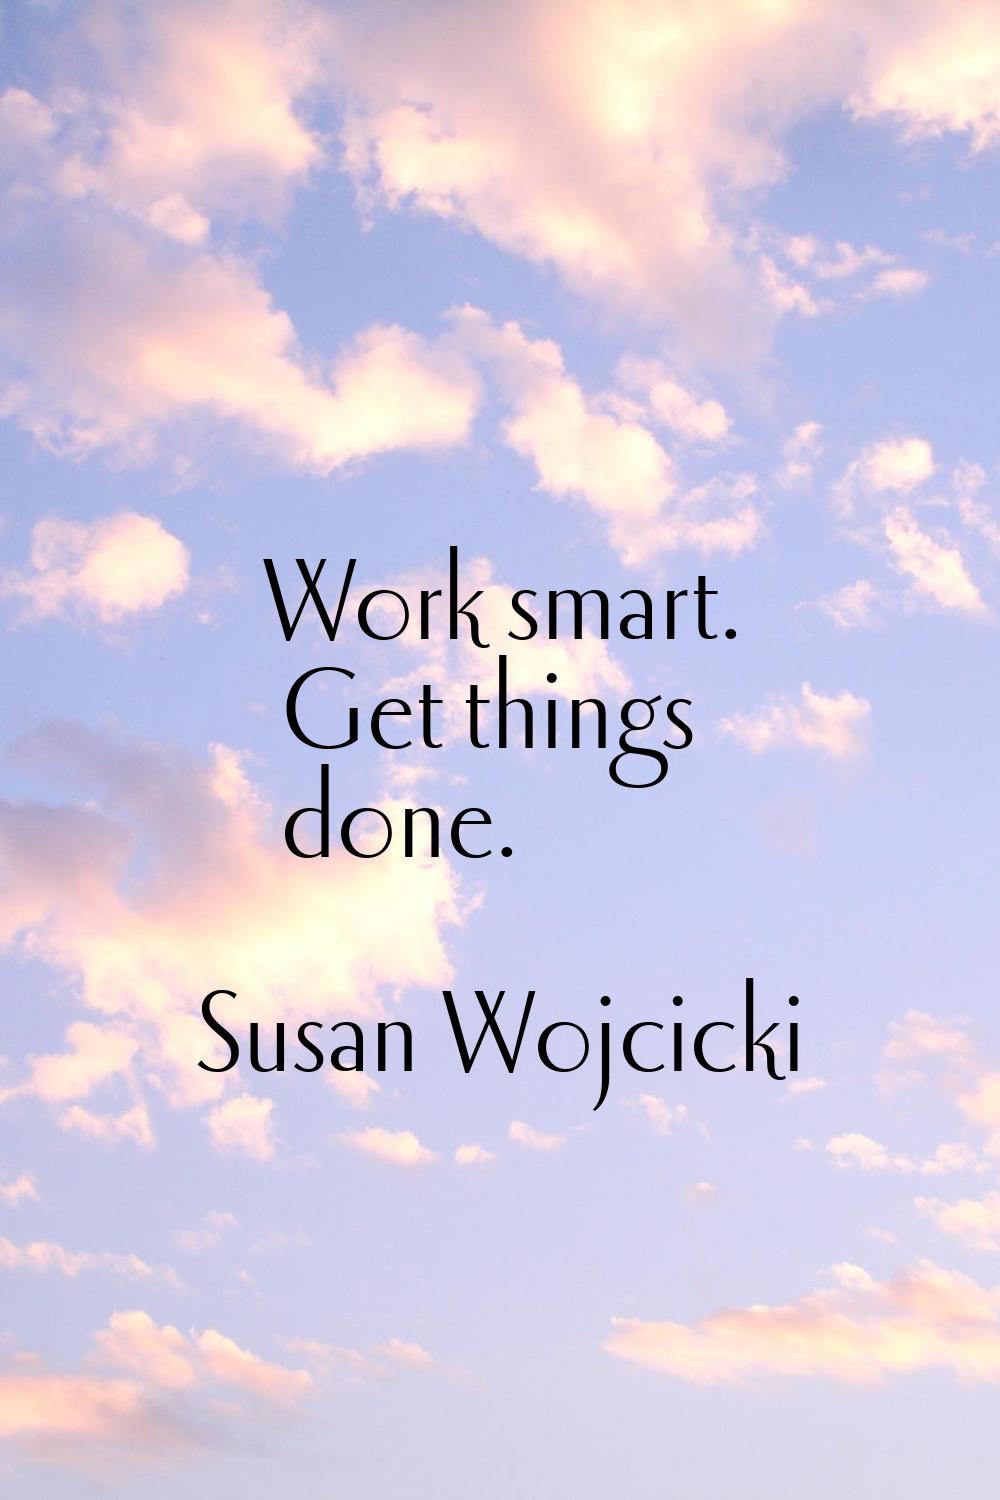 Work smart. Get things done.